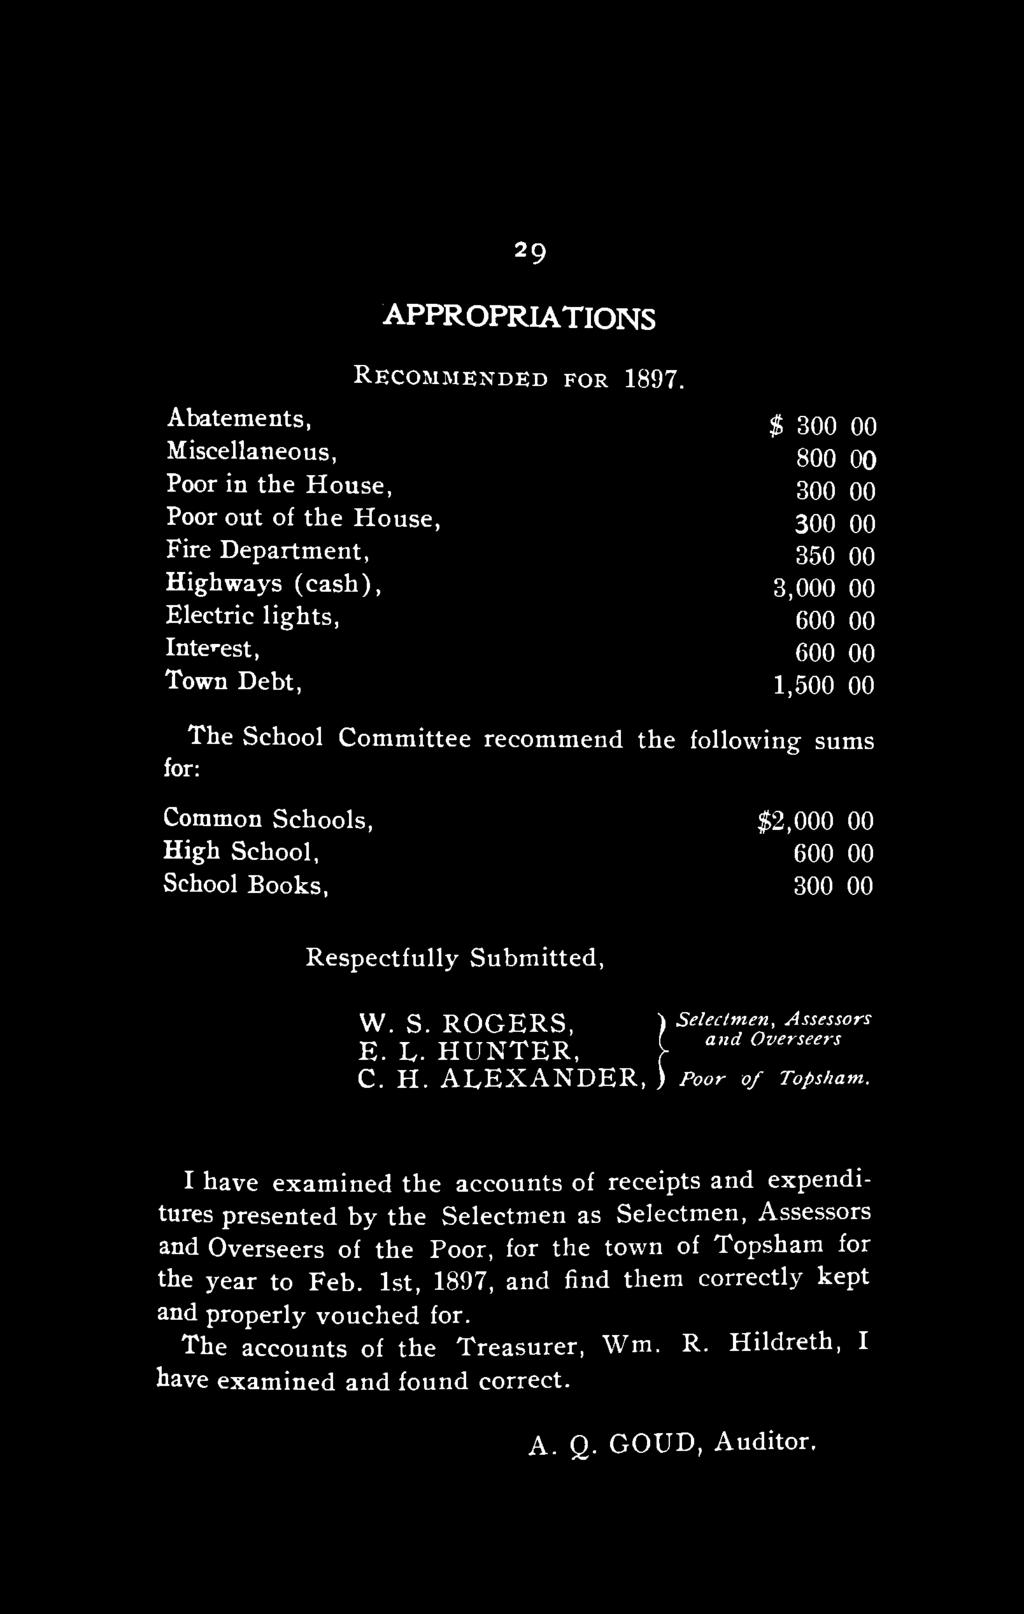 29 APPROPRIATIONS RECOMMENDED FOR 1897.